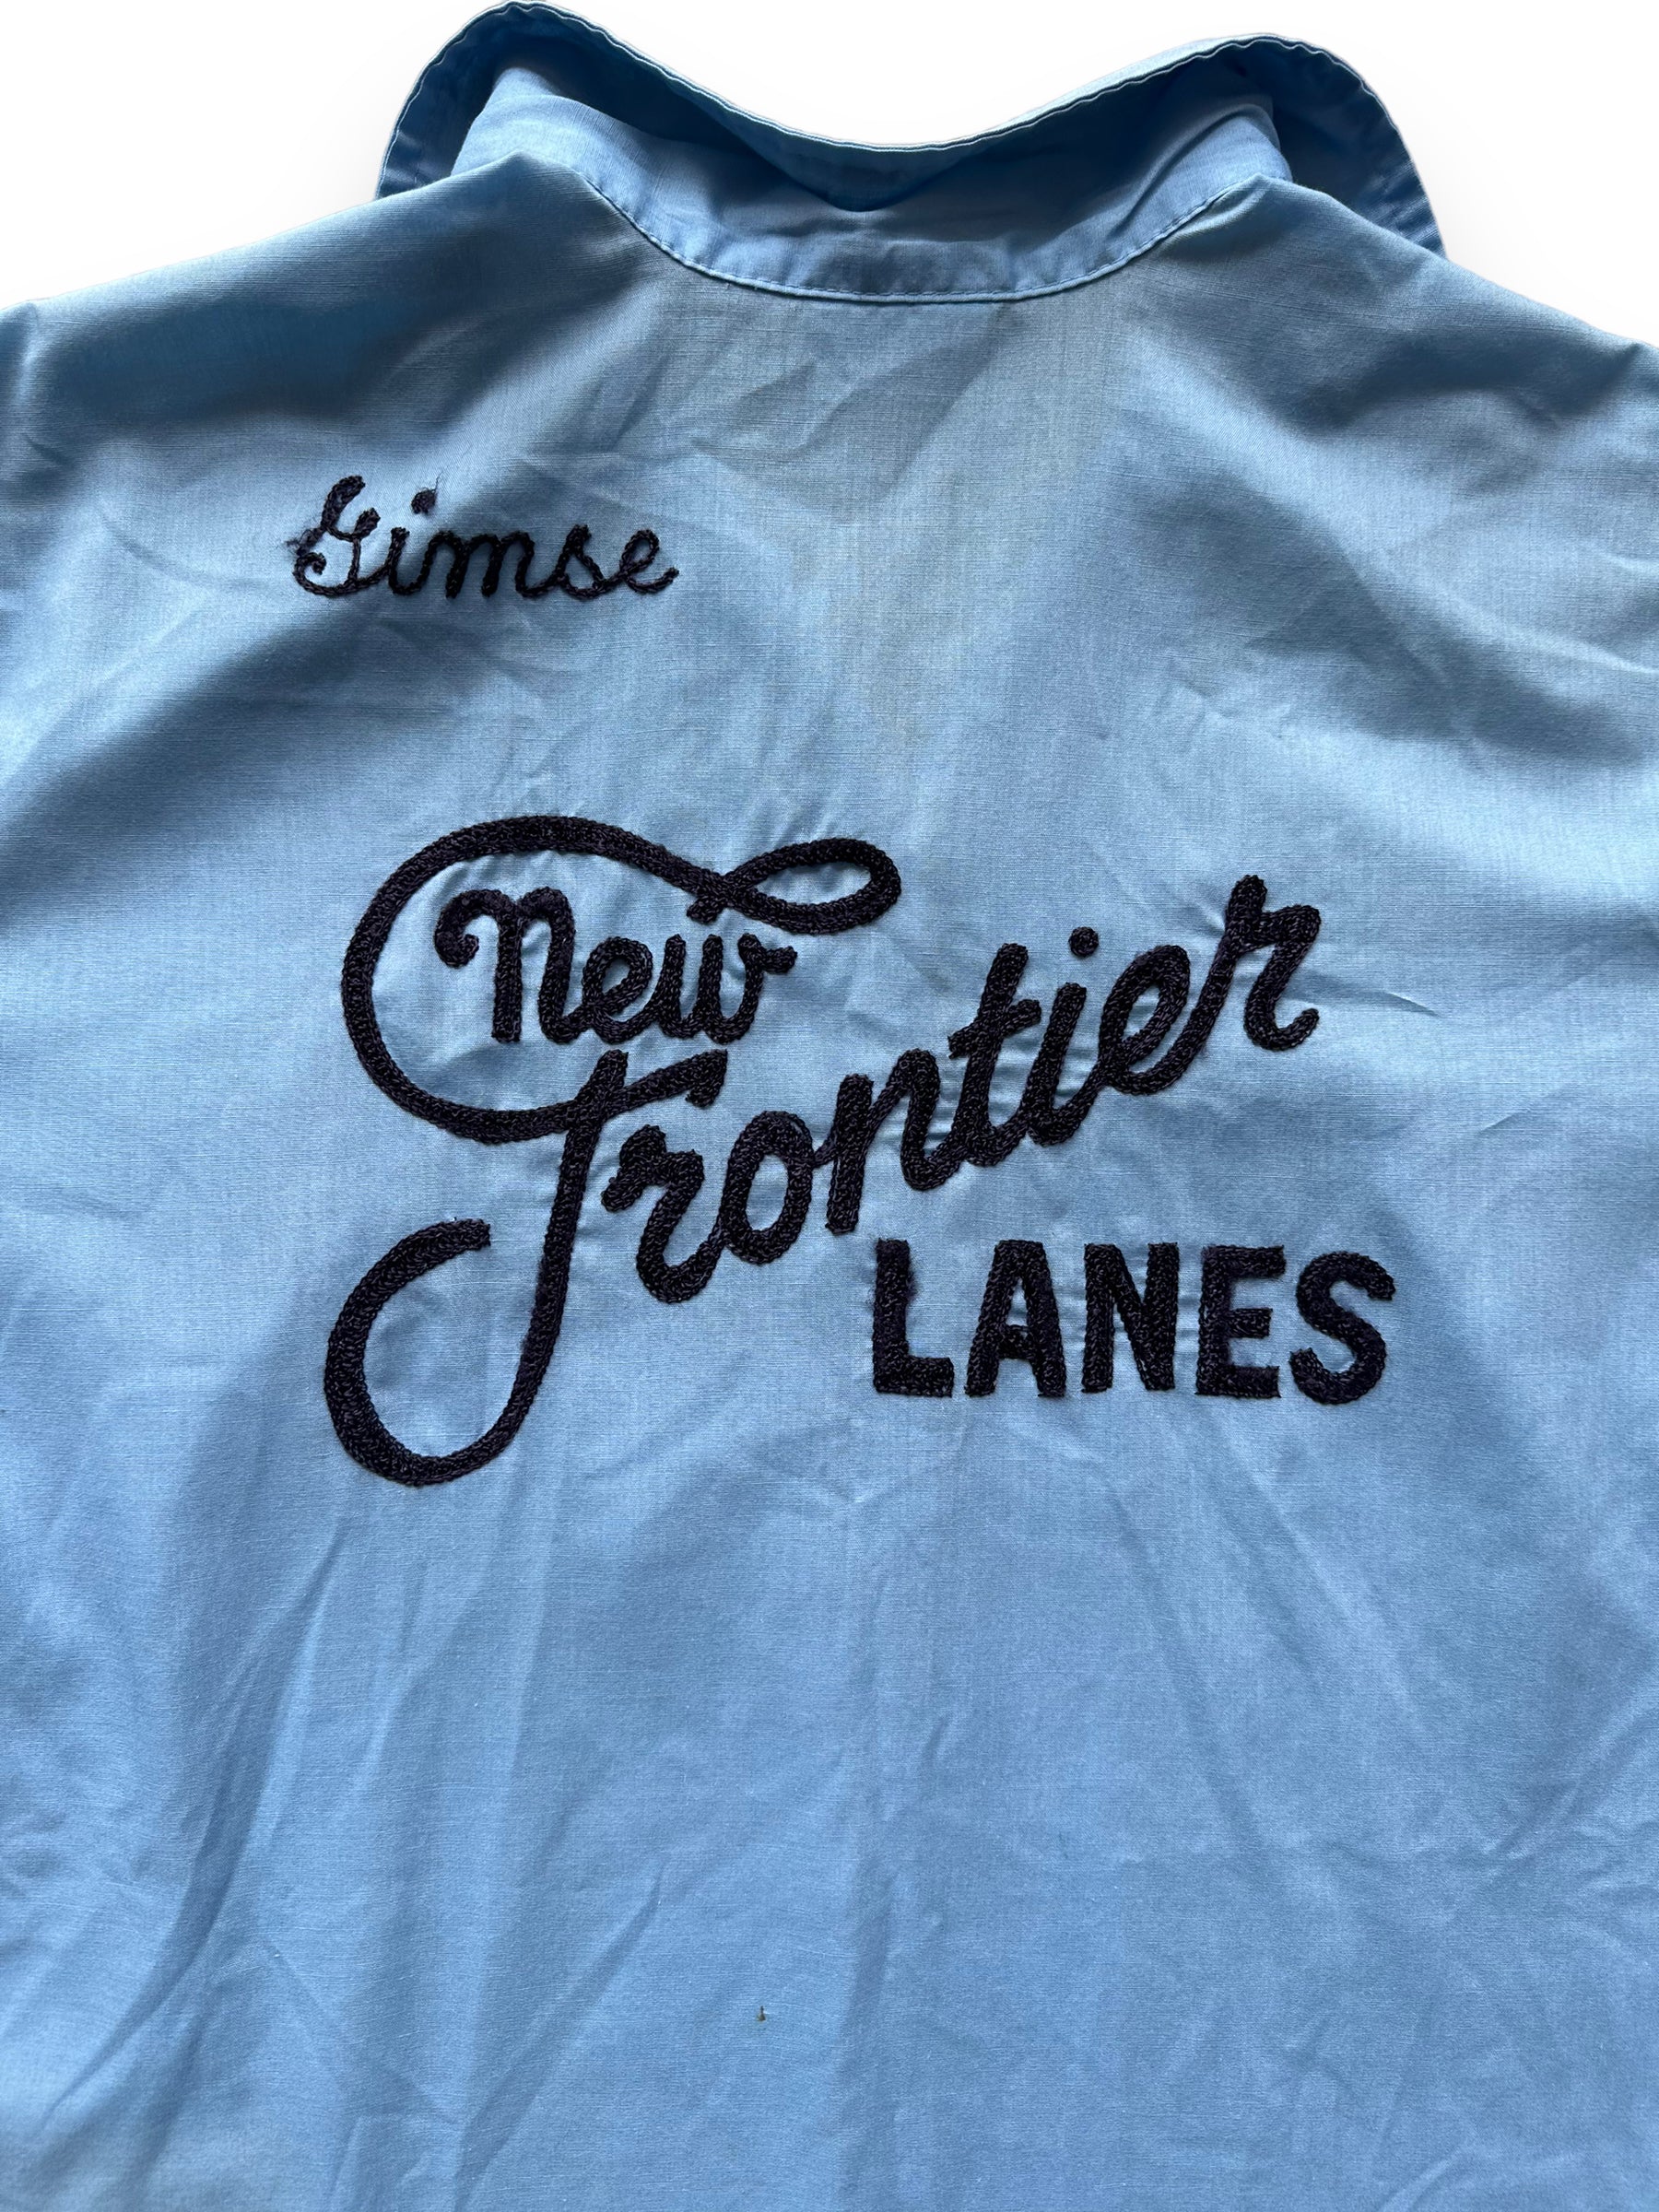 Back chainstitching on Vintage "New Frontier Lanes" Chainstitched Bowling Shirt SZ 40 | Vintage Bowling Shirt Seattle | Barn Owl Vintage Seattle